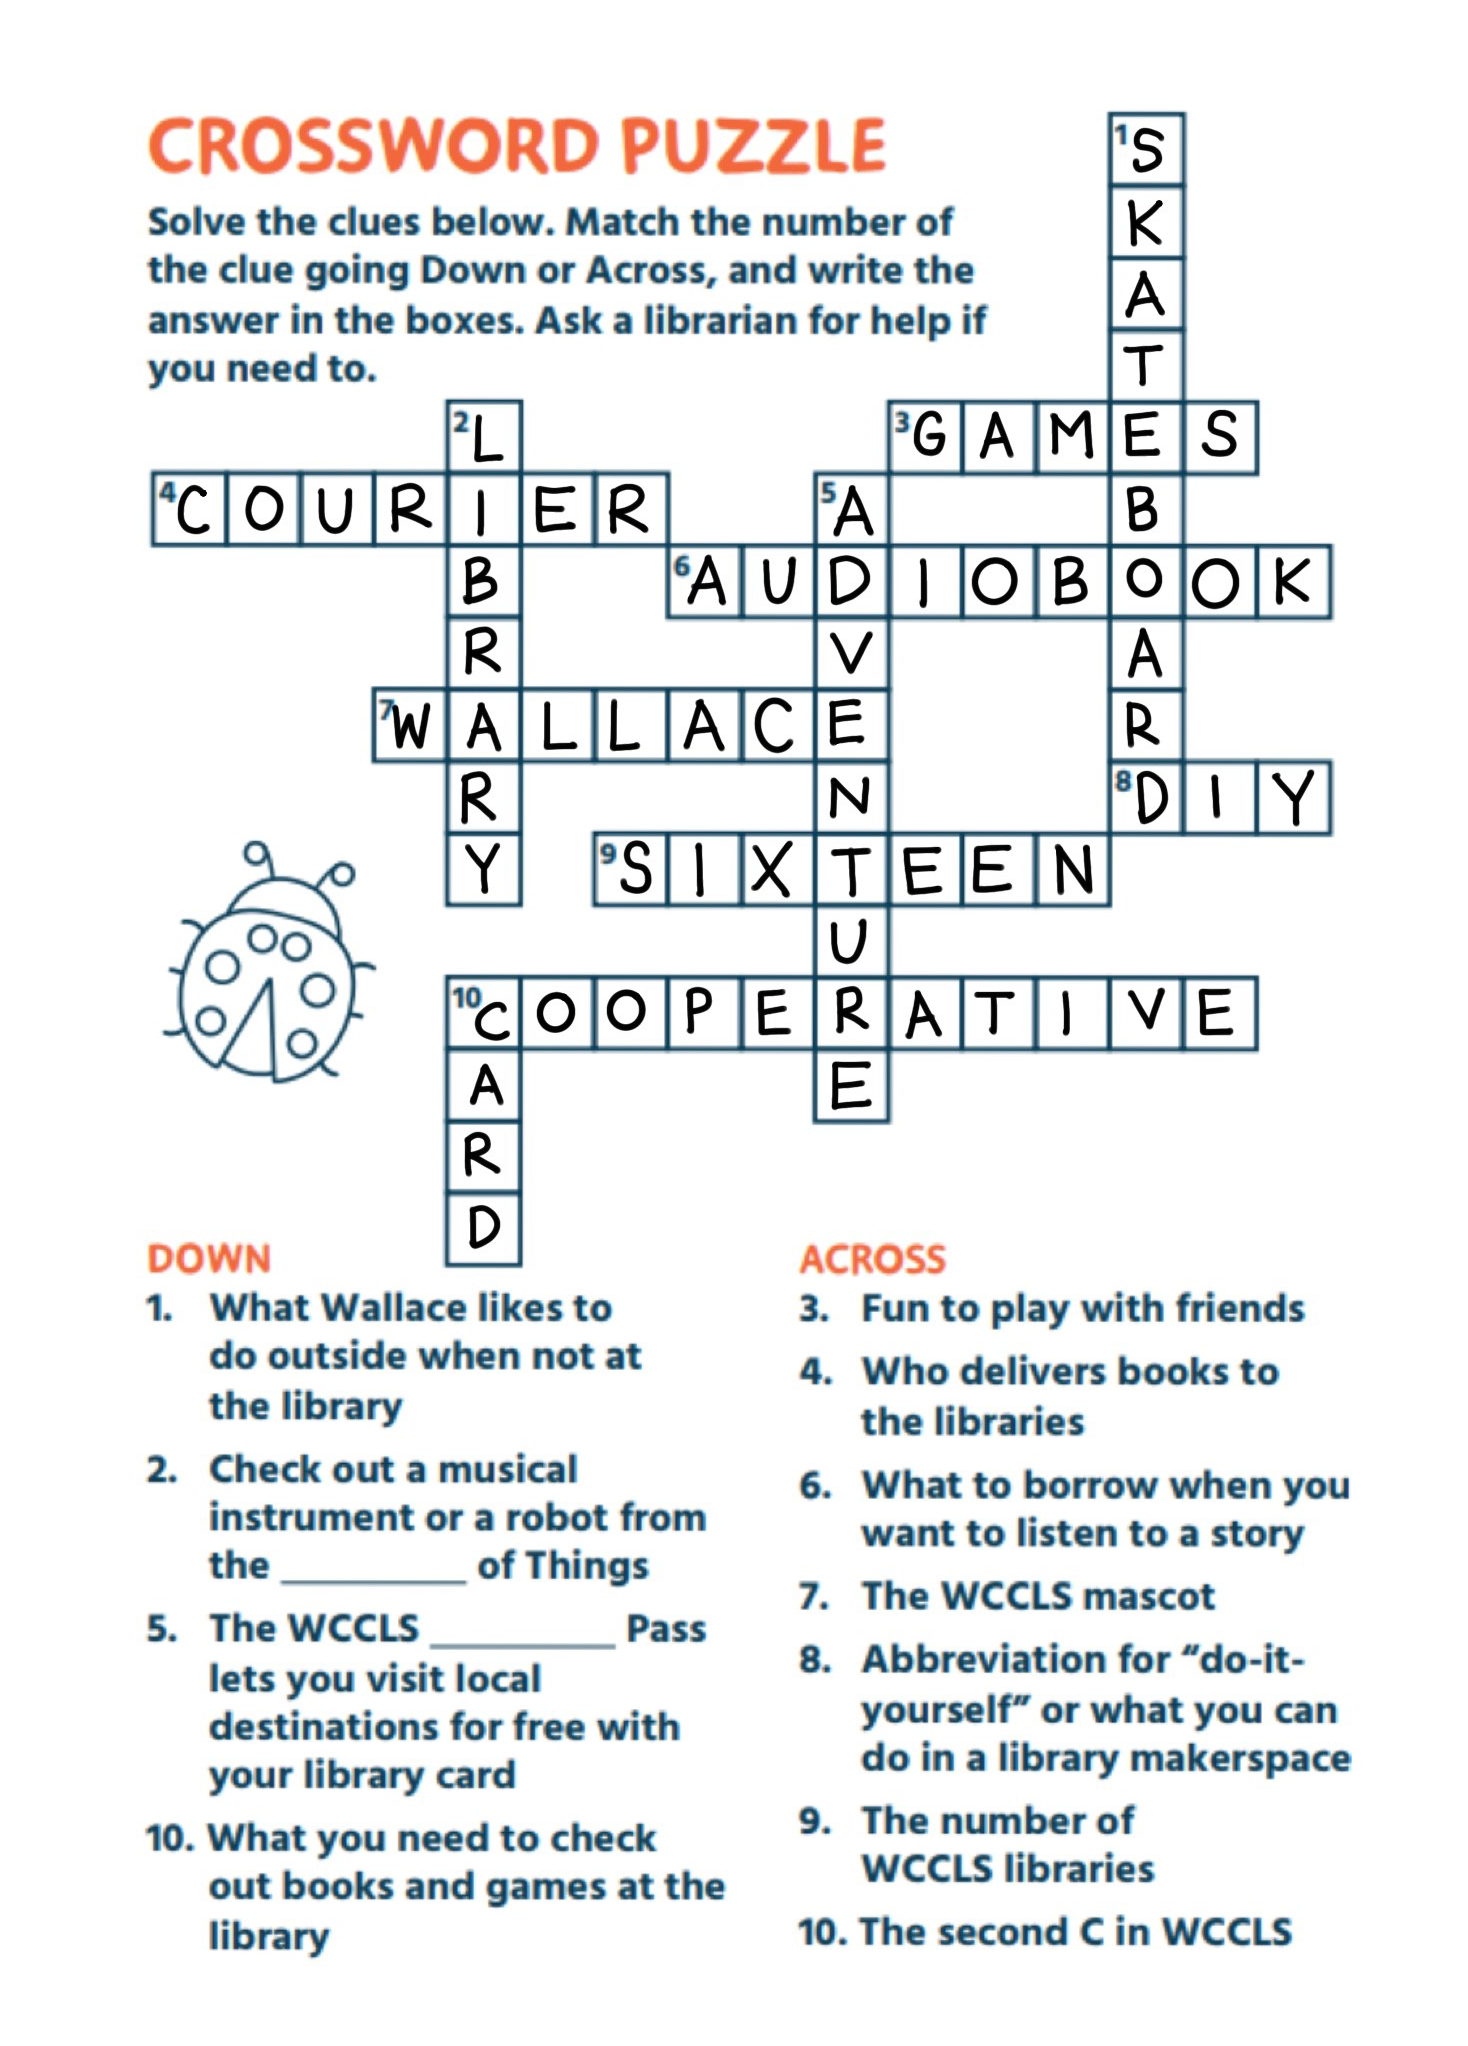 Image containing answers to the crossword puzzle activity